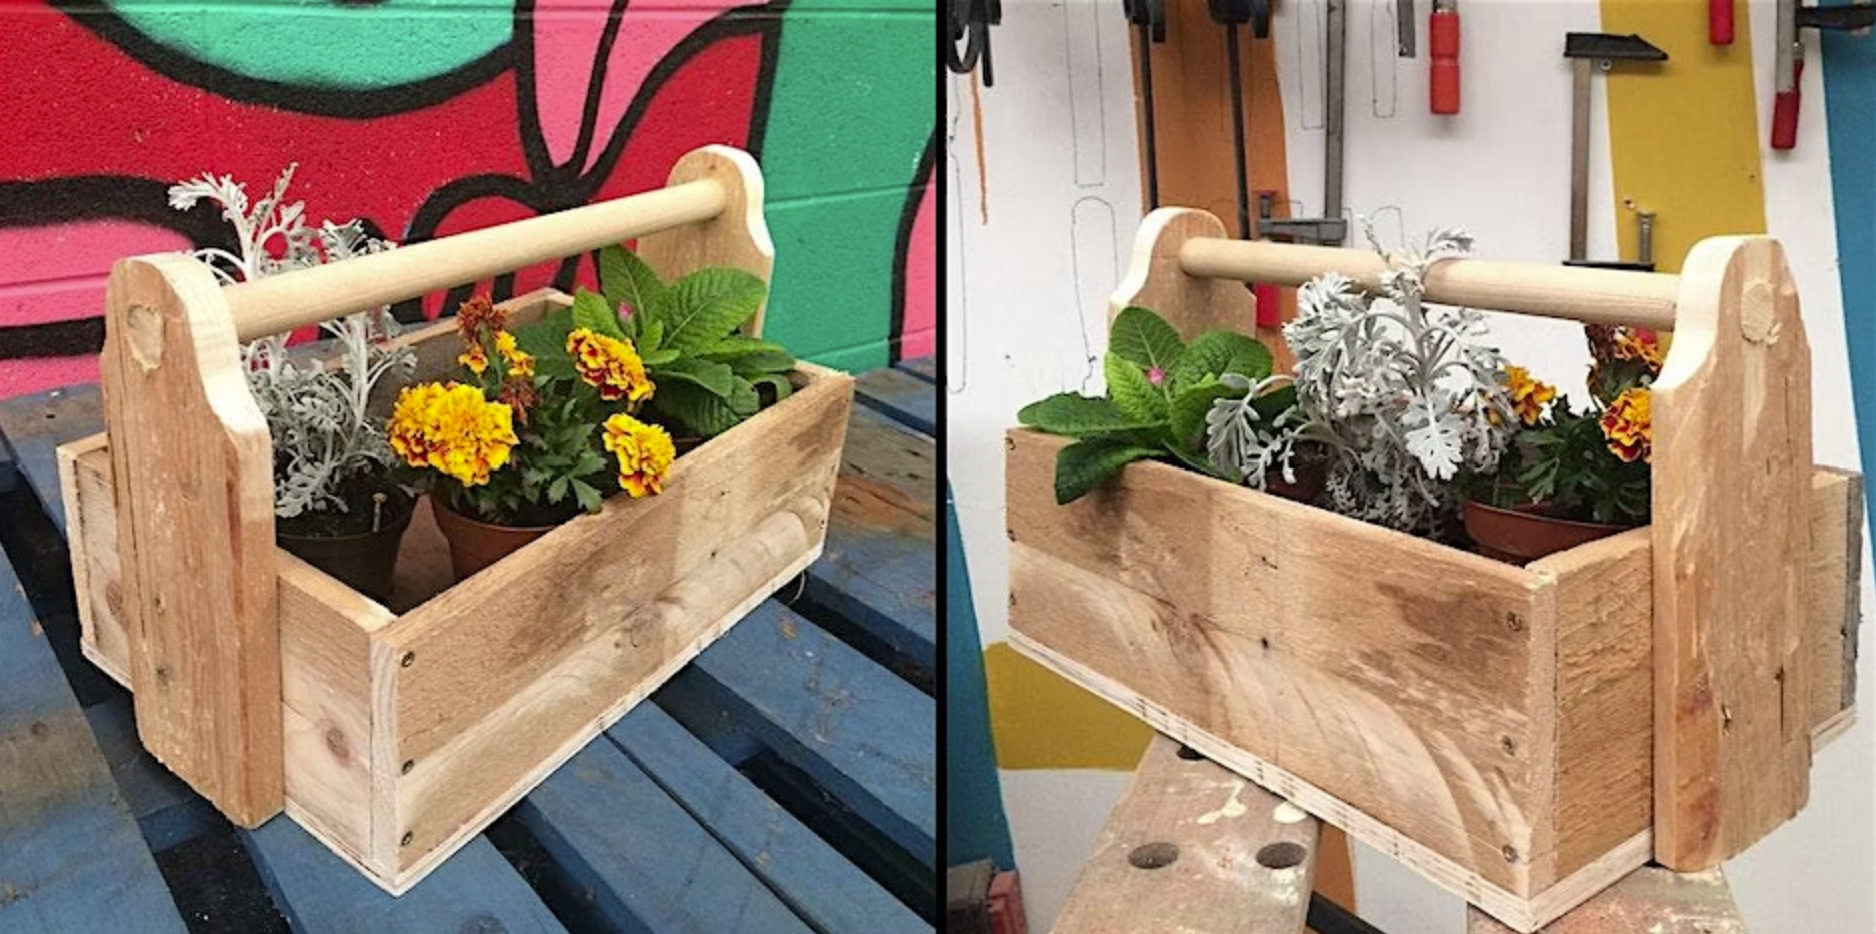 two images of a toolbox with plants in them in front of a colourful background